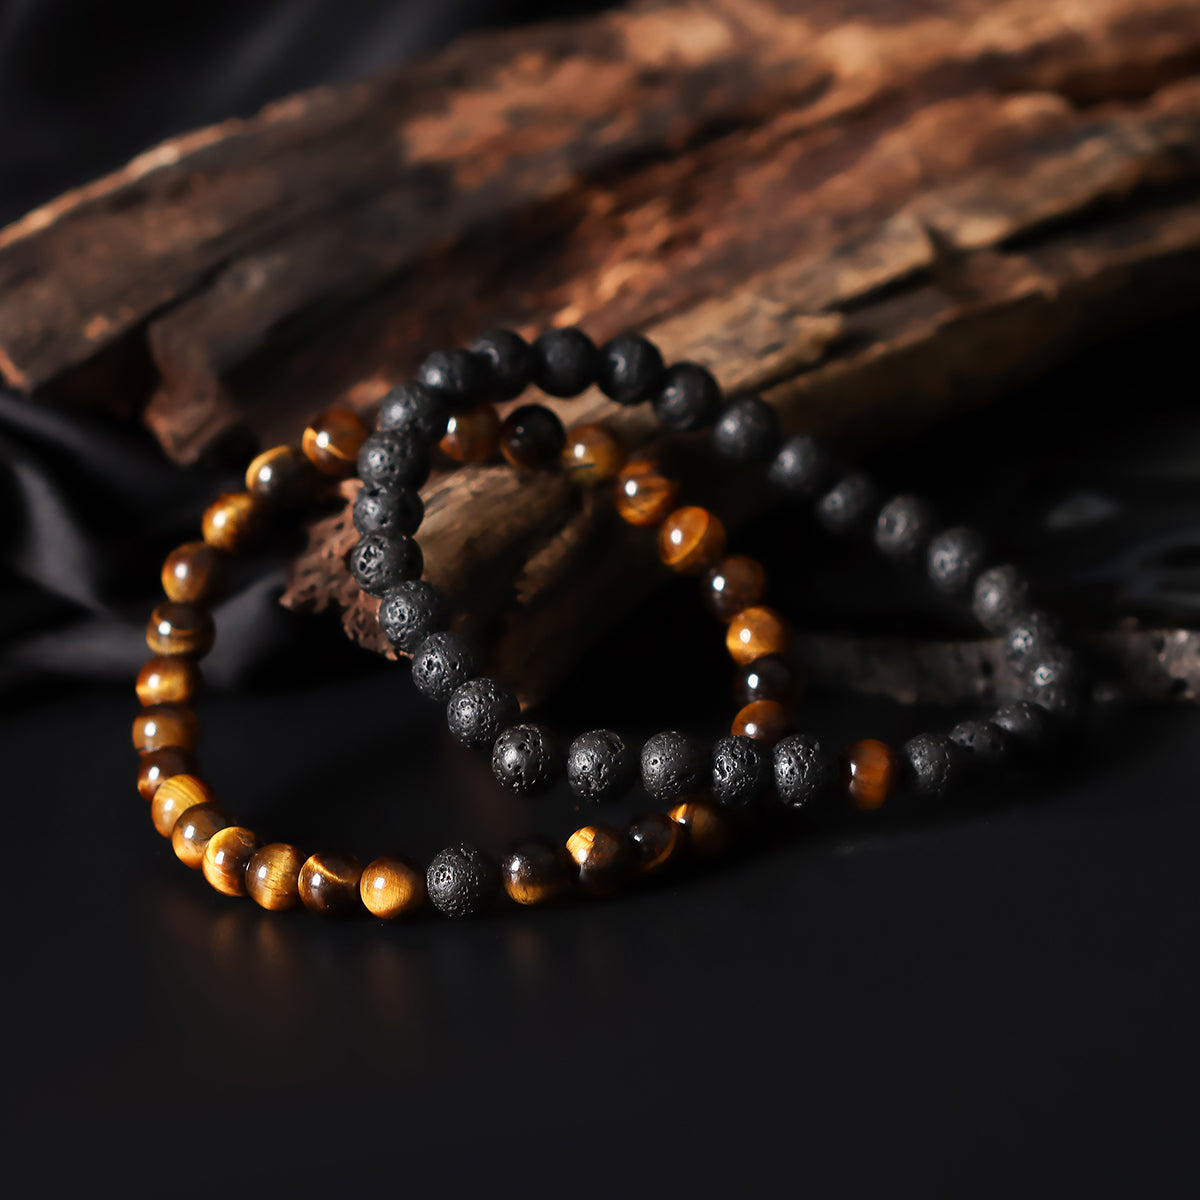 Artistic close-up of the Natural Tiger's Eye & Lava Gemstone Bracelet. A captivating shot capturing the golden hues of Tiger's Eye and the raw elegance of lava gemstones, creating a unique and eye-catching composition.